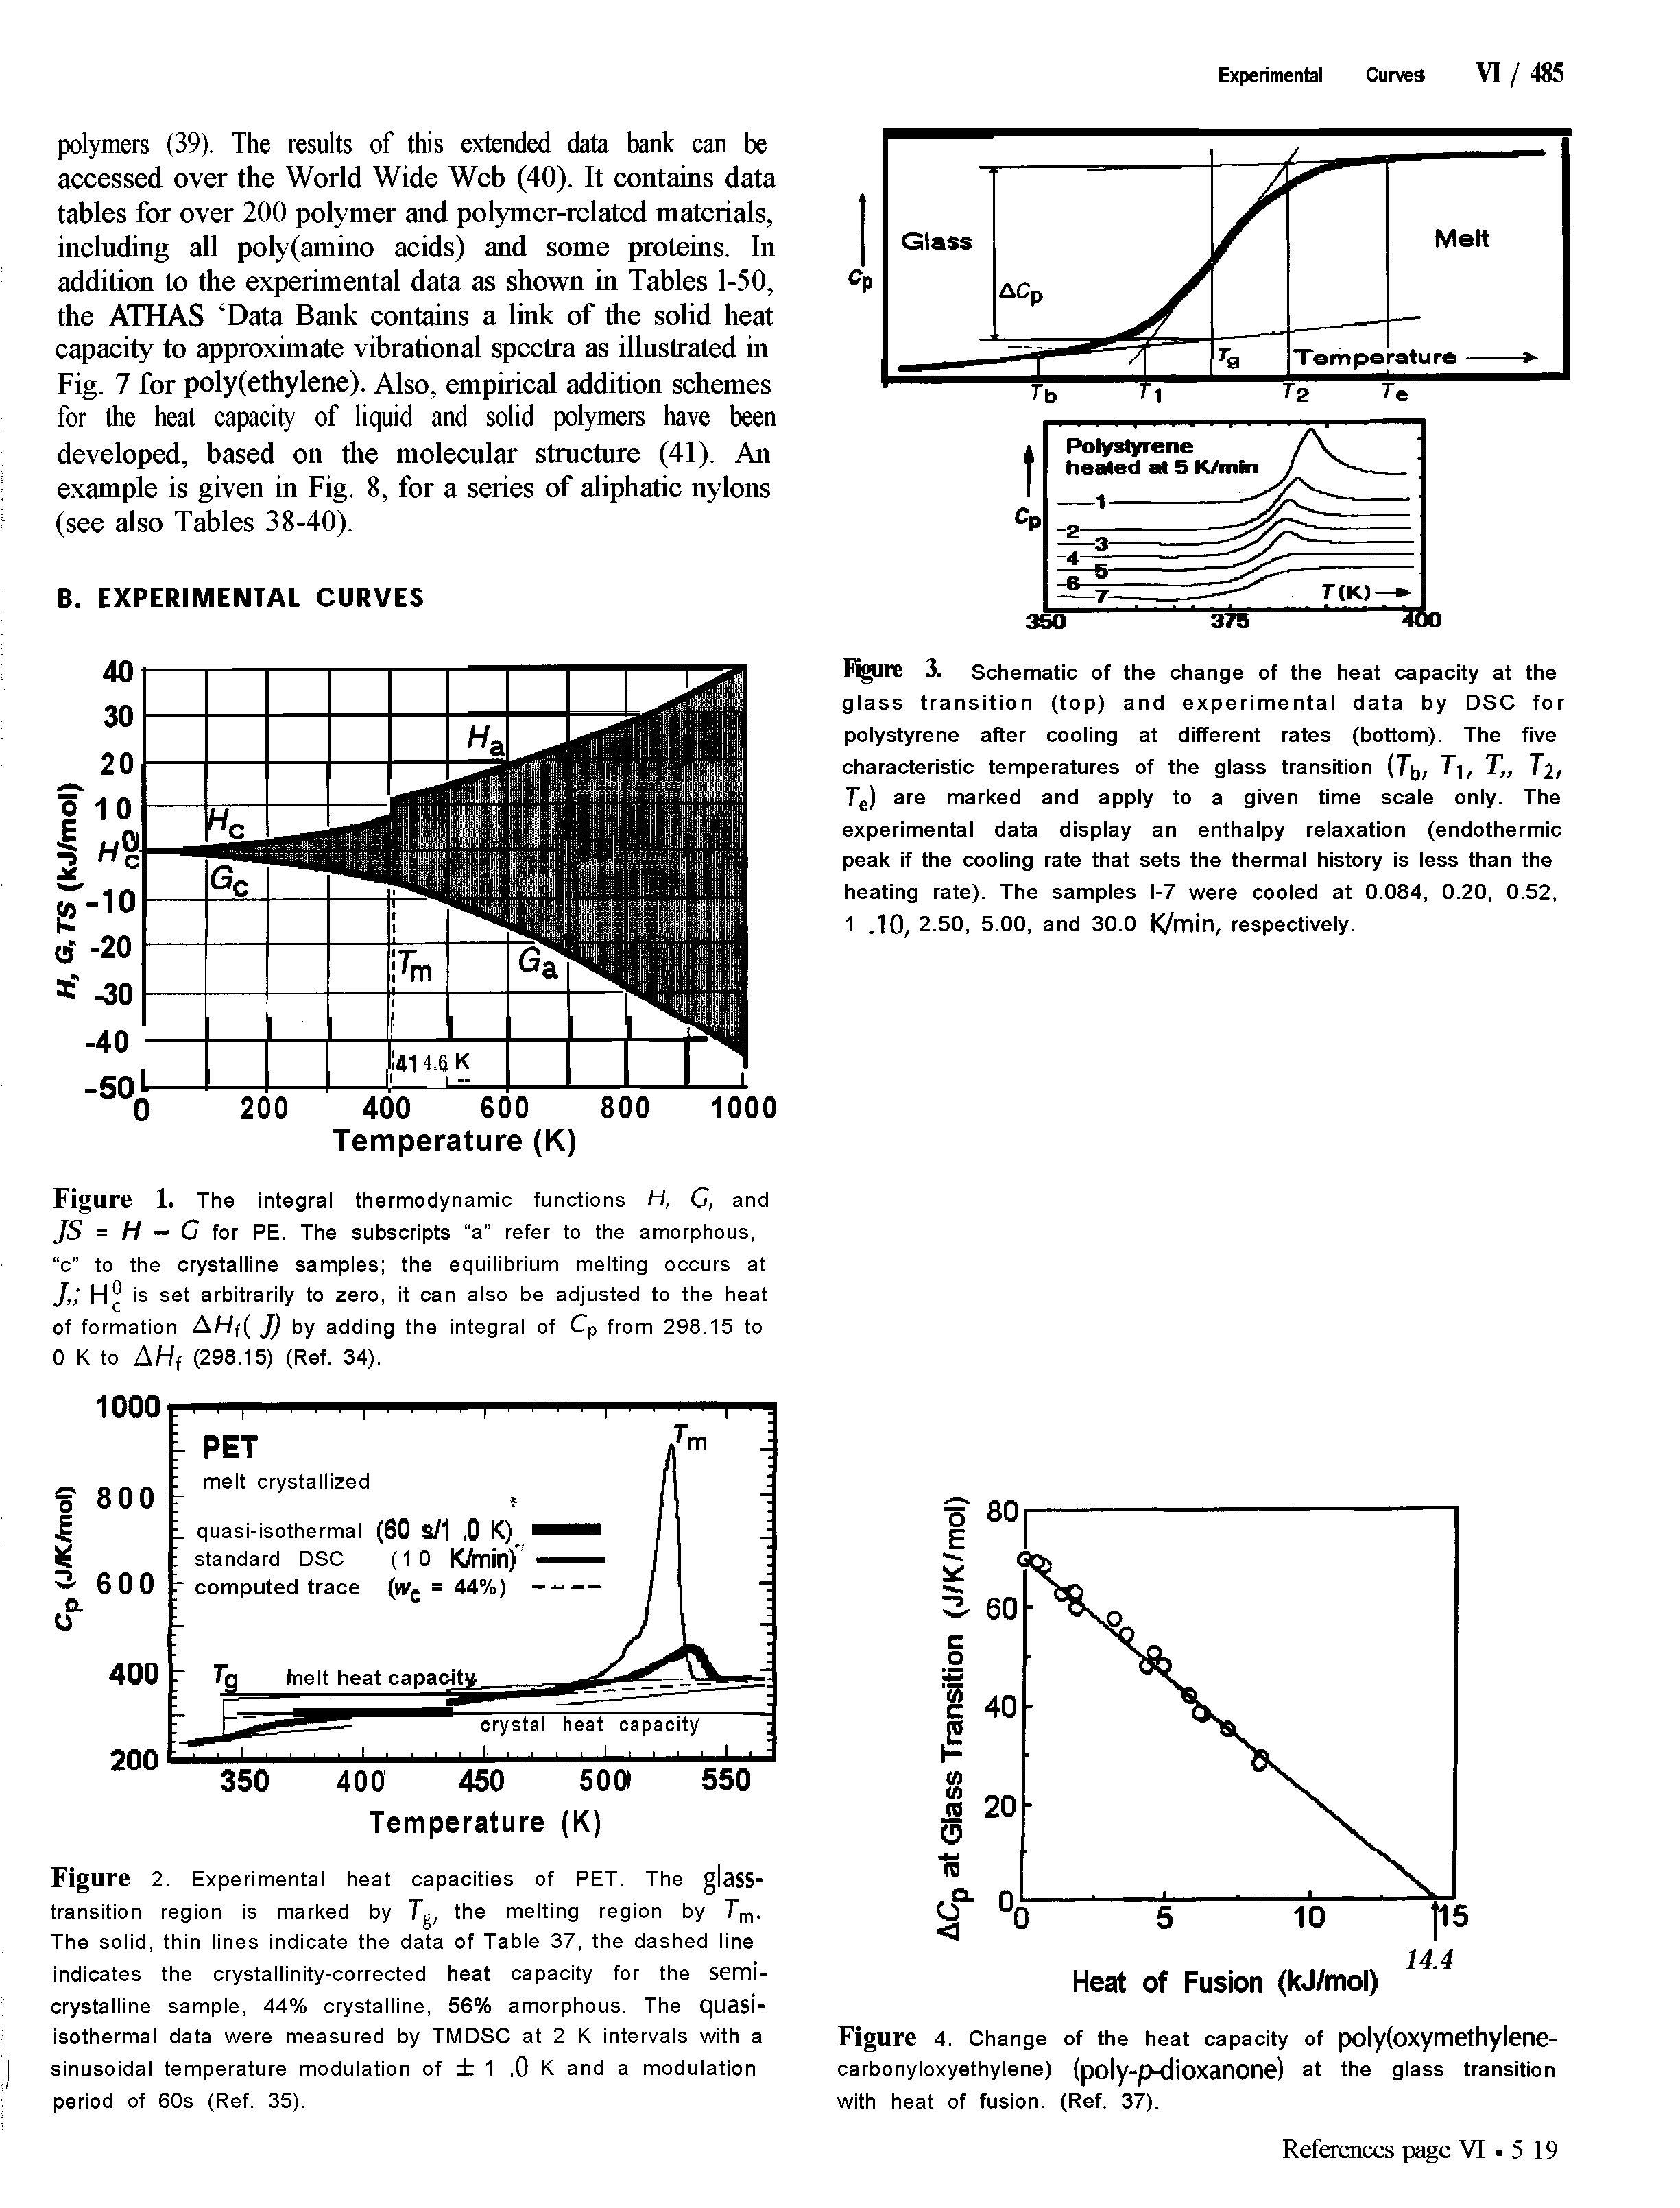 Figure 1. The integral thermodynamic functions H, C, and JS = H — C for PE. The subsoripts a refer to the amorphous, "o to the orystalline samples the equilibrium melting occurs at 1 H° is set arbitrarily to zero, it oan also be adjusted to the heat of formation AHf( J) by adding the integral of Cp from 298.15 to 0 K to AHf (298.15) (Ref. 34).